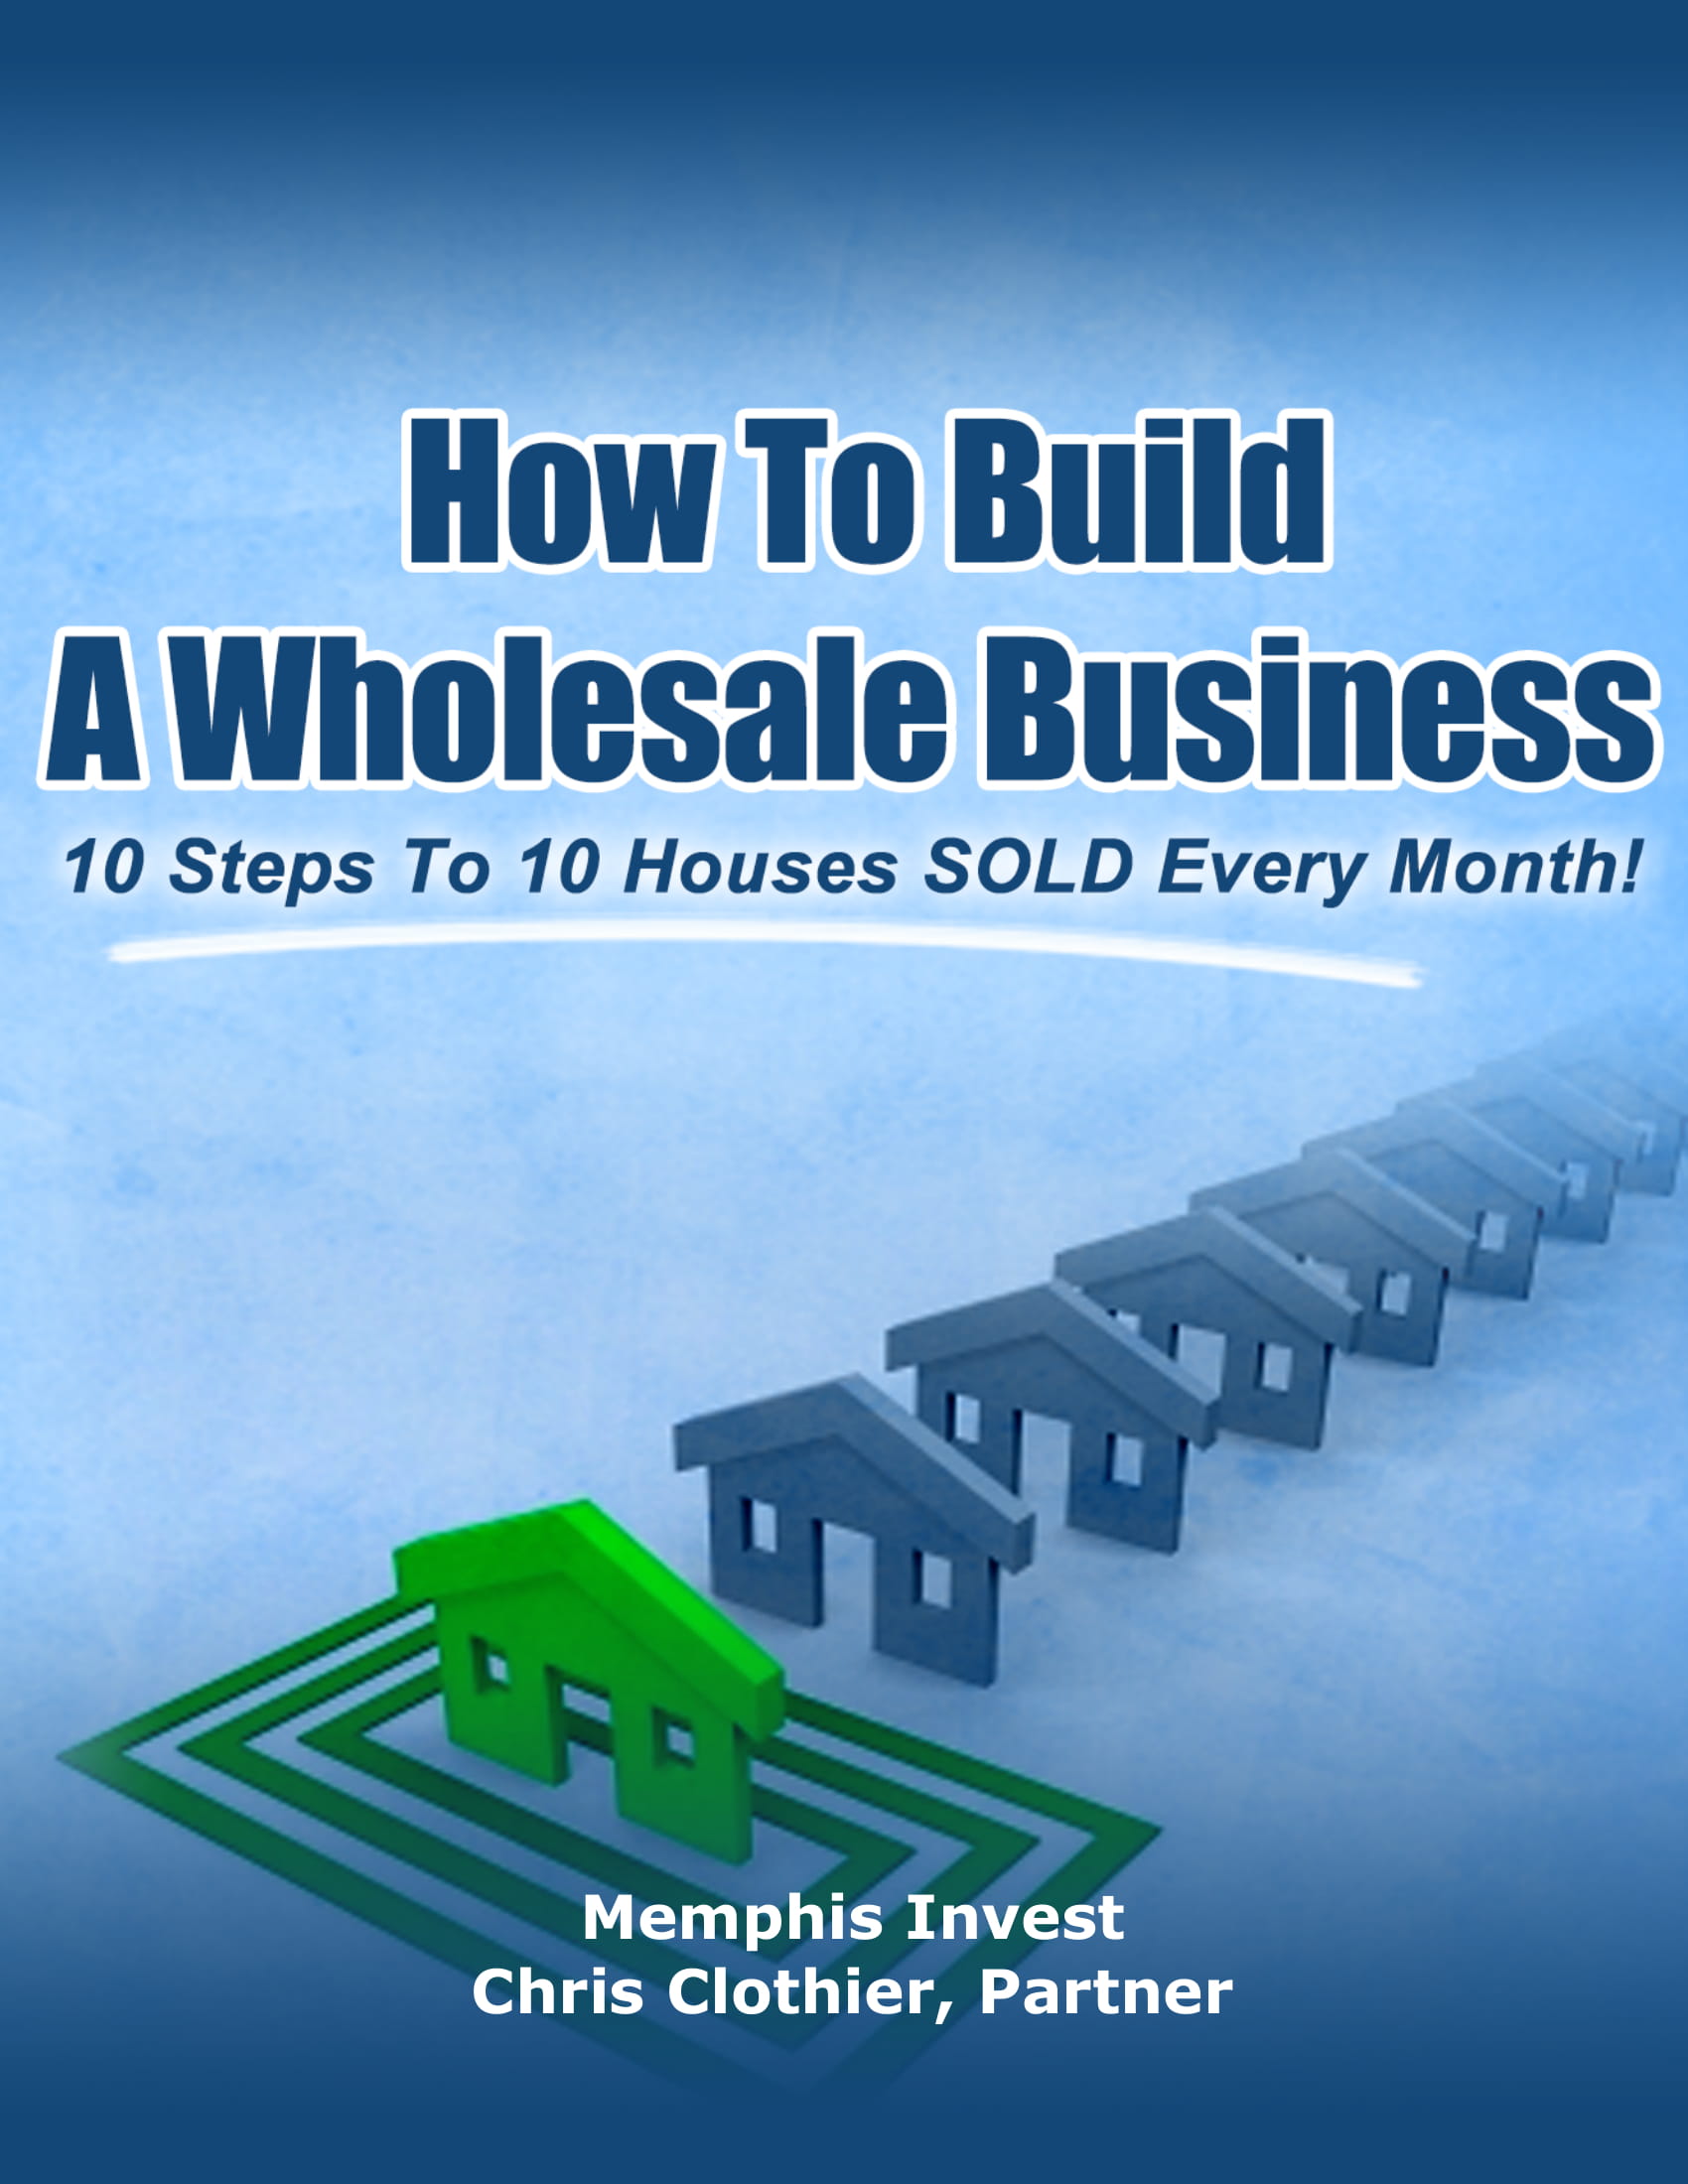 10 Steps To Wholesaleing 10 Houses A Month